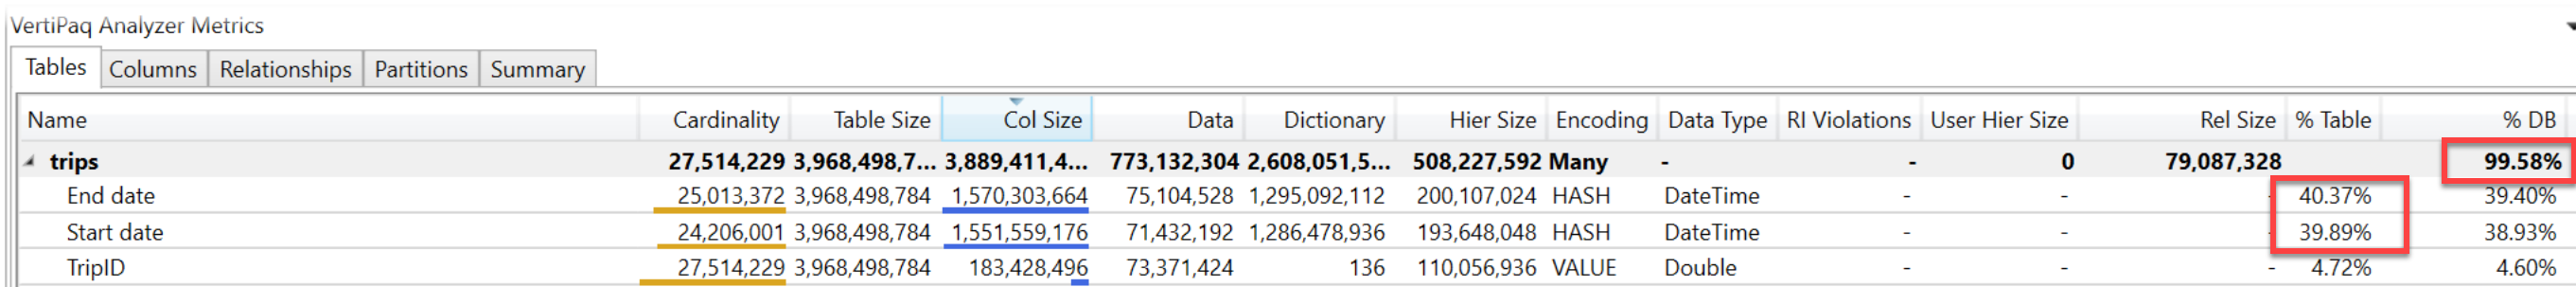 Screenshot of VertiPaq Analyzer scan results, showing that the trips table is consuming 99.6% of the database memory.